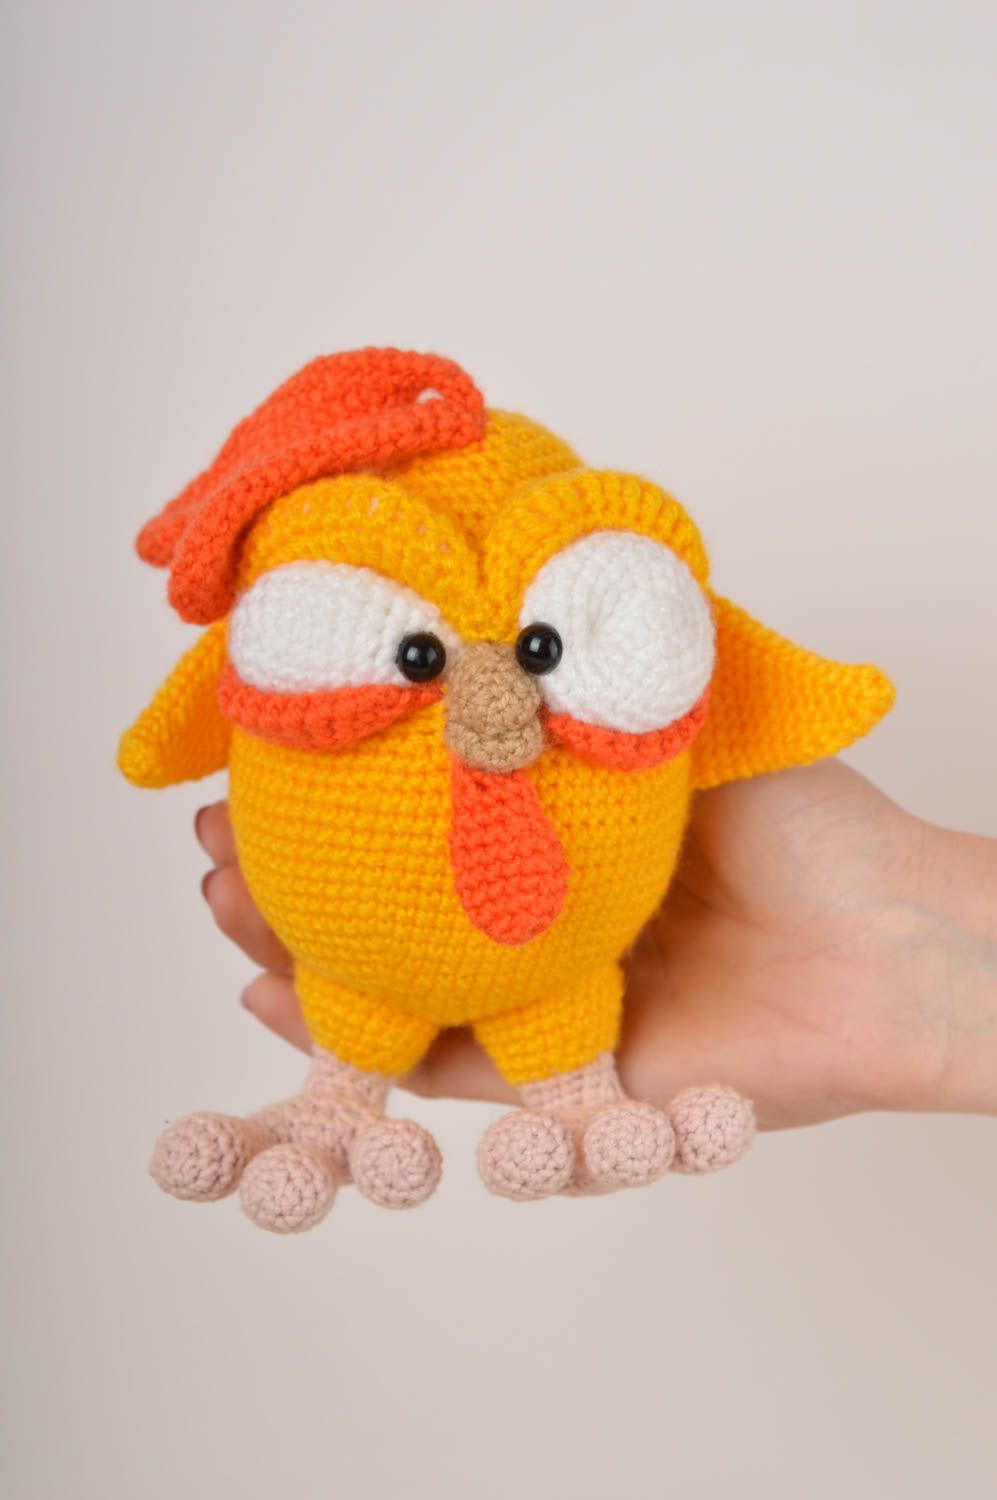 Cute toy hand-crocheted toys for children handmade stuffed toys for babies photo 5